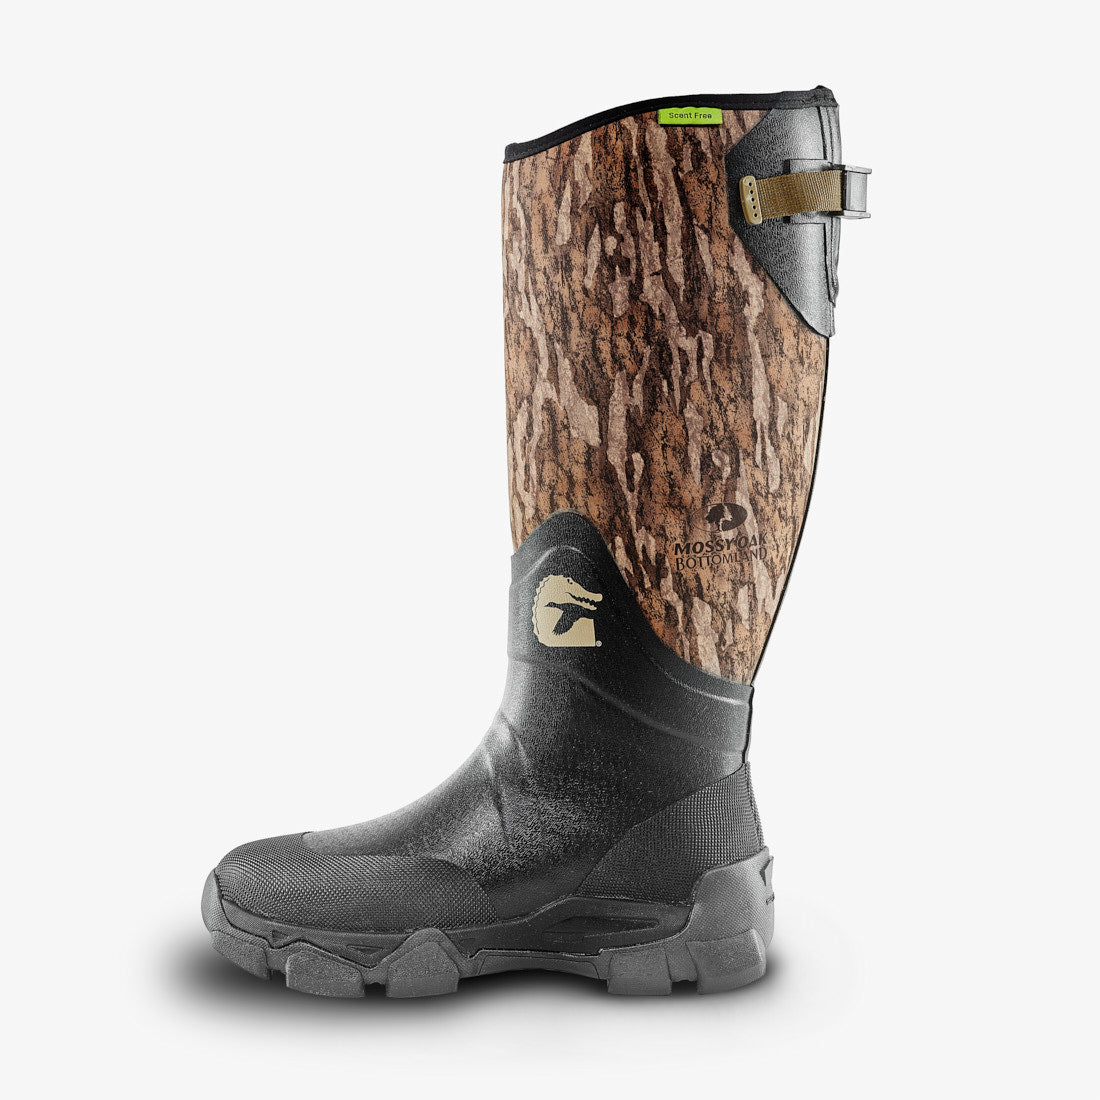 Gator Waders Women's Omega Insulated Boots - Realtree Max 5 10